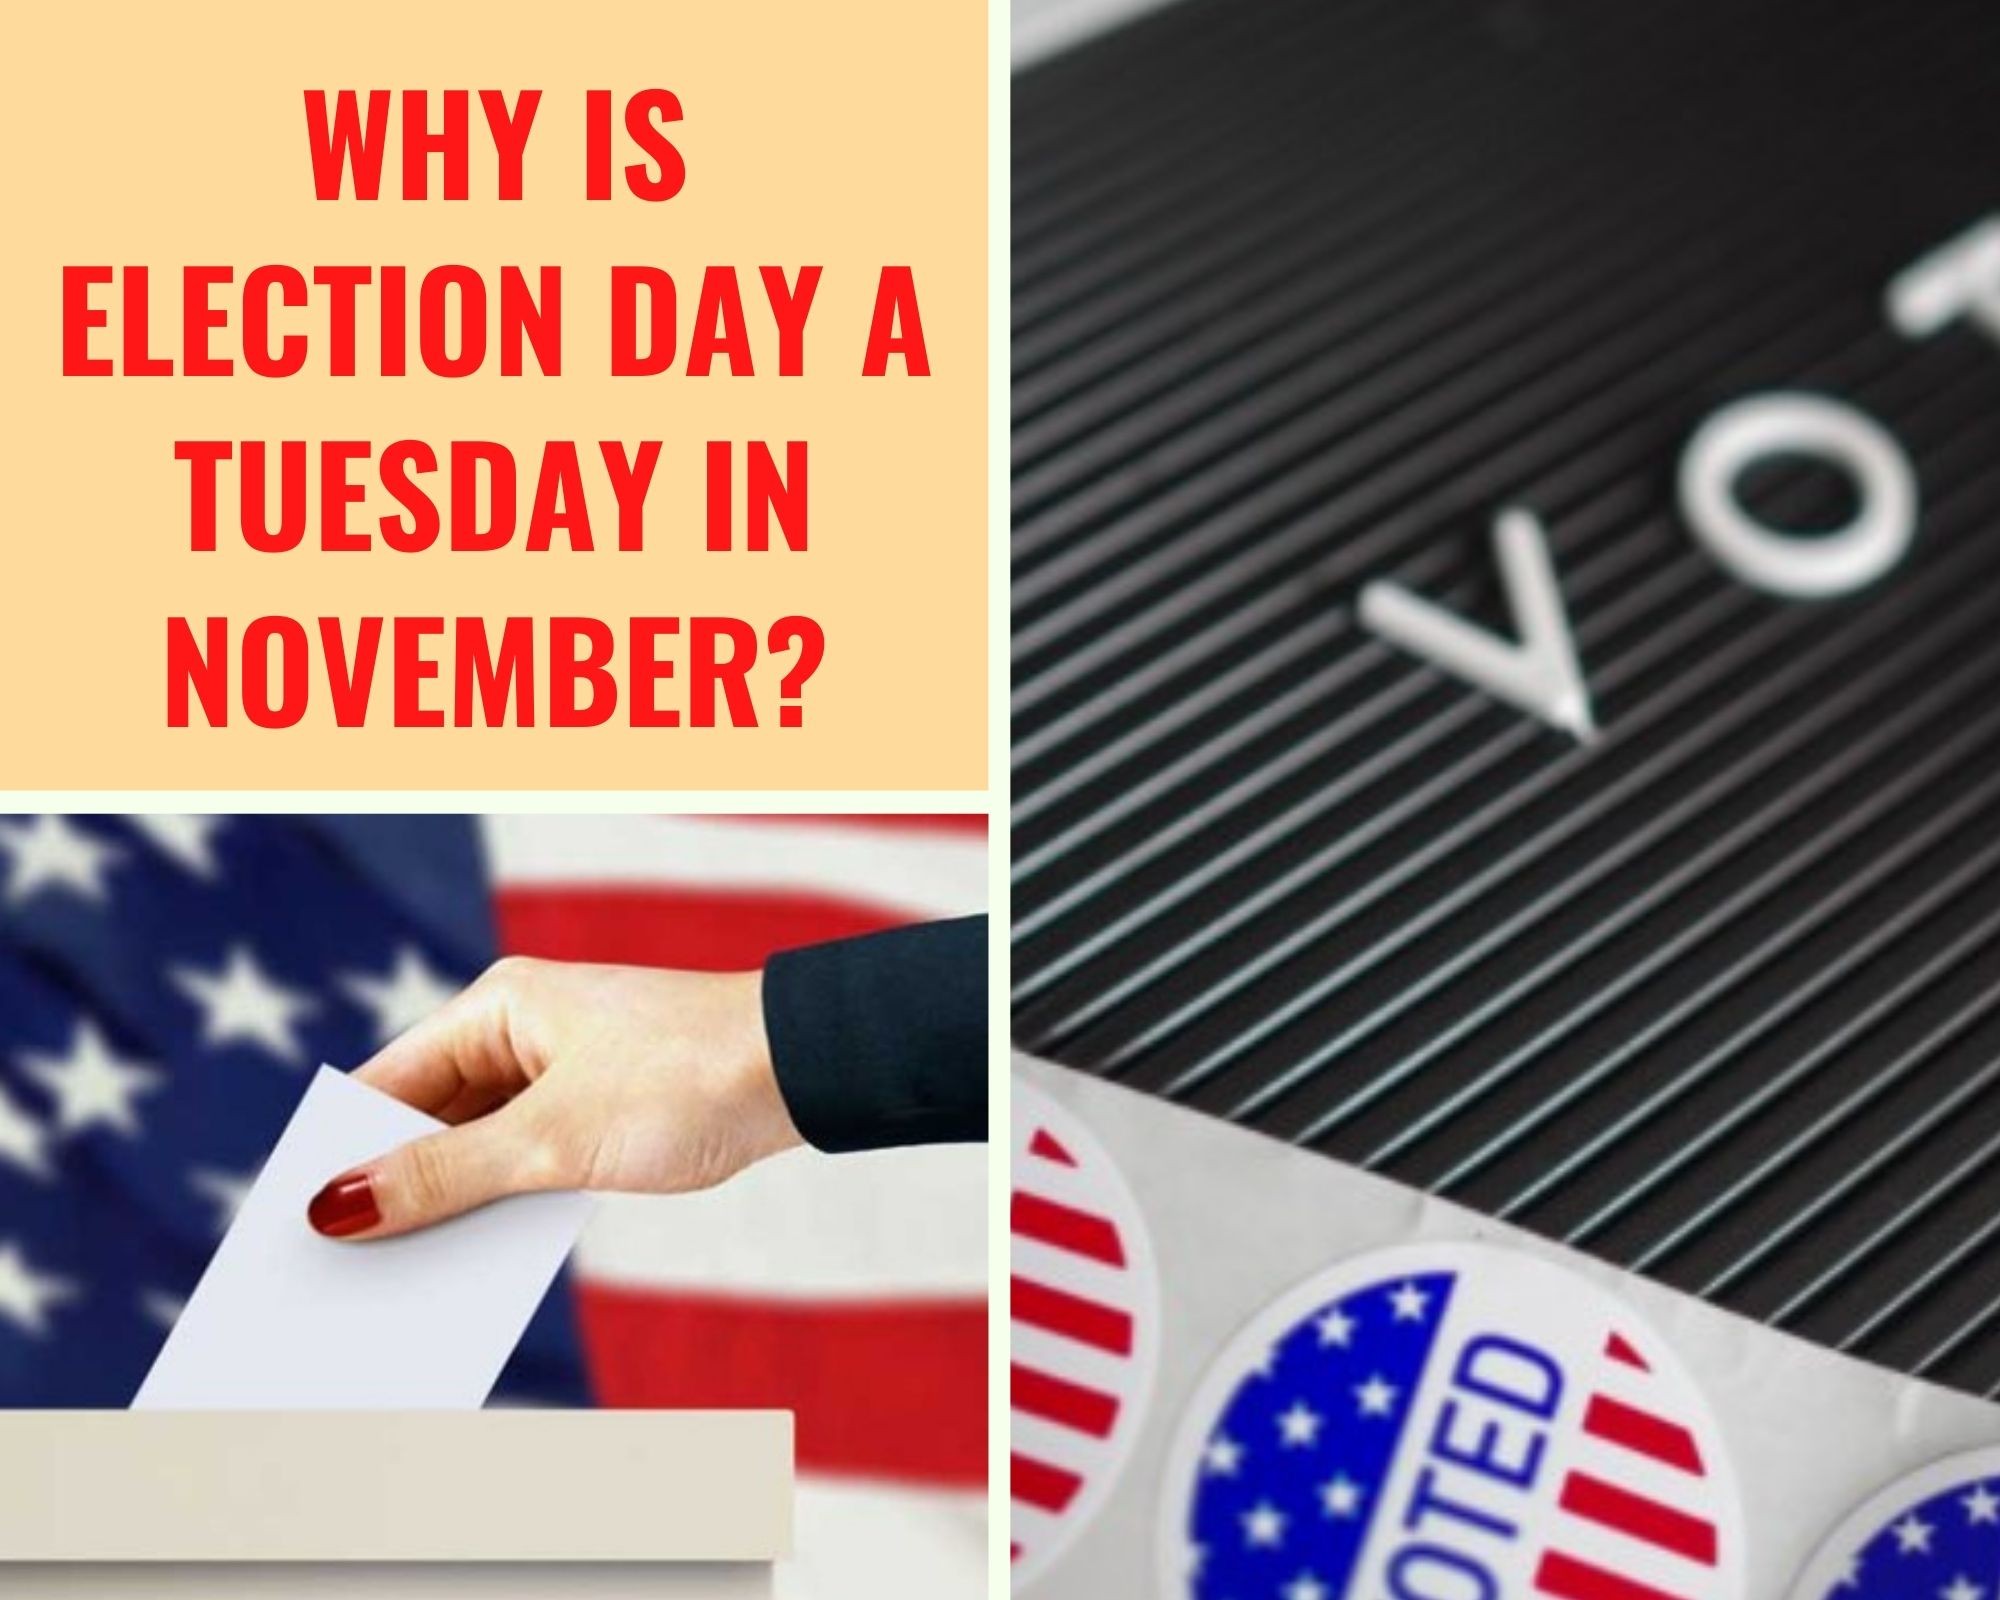 Why Is Election Day a Tuesday in November?